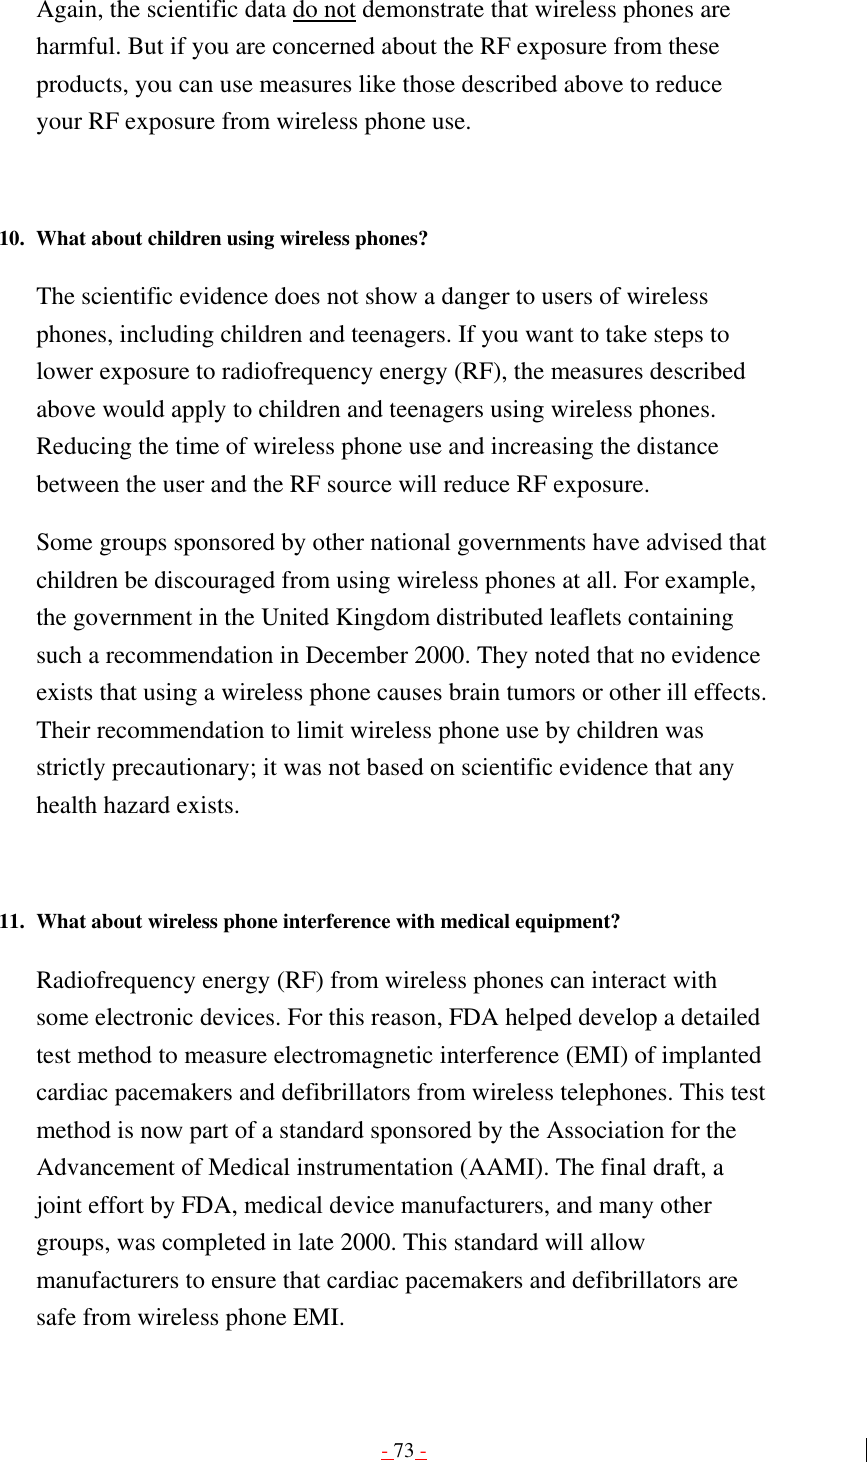 - 73 - Again, the scientific data do not demonstrate that wireless phones are harmful. But if you are concerned about the RF exposure from these products, you can use measures like those described above to reduce your RF exposure from wireless phone use.   10.  What about children using wireless phones?   The scientific evidence does not show a danger to users of wireless phones, including children and teenagers. If you want to take steps to lower exposure to radiofrequency energy (RF), the measures described above would apply to children and teenagers using wireless phones. Reducing the time of wireless phone use and increasing the distance between the user and the RF source will reduce RF exposure. Some groups sponsored by other national governments have advised that children be discouraged from using wireless phones at all. For example, the government in the United Kingdom distributed leaflets containing such a recommendation in December 2000. They noted that no evidence exists that using a wireless phone causes brain tumors or other ill effects. Their recommendation to limit wireless phone use by children was strictly precautionary; it was not based on scientific evidence that any health hazard exists.   11.  What about wireless phone interference with medical equipment?   Radiofrequency energy (RF) from wireless phones can interact with some electronic devices. For this reason, FDA helped develop a detailed test method to measure electromagnetic interference (EMI) of implanted cardiac pacemakers and defibrillators from wireless telephones. This test method is now part of a standard sponsored by the Association for the Advancement of Medical instrumentation (AAMI). The final draft, a joint effort by FDA, medical device manufacturers, and many other groups, was completed in late 2000. This standard will allow manufacturers to ensure that cardiac pacemakers and defibrillators are safe from wireless phone EMI. 